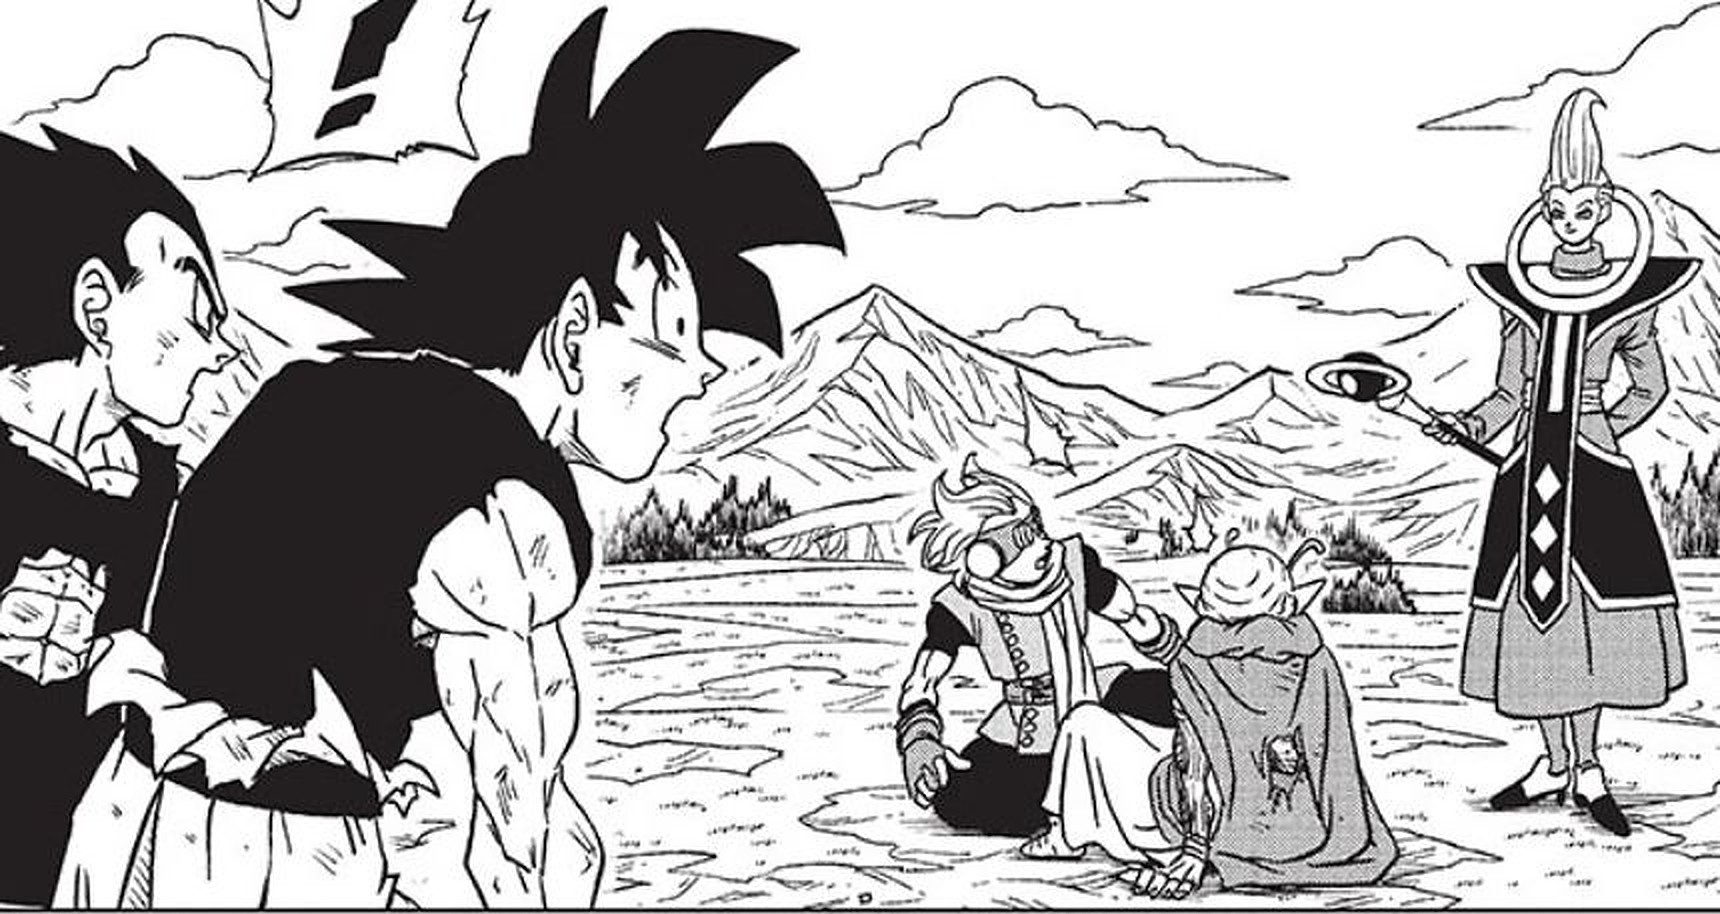 Dragon Ball Super chapter 88 release time, date confirmed after delay